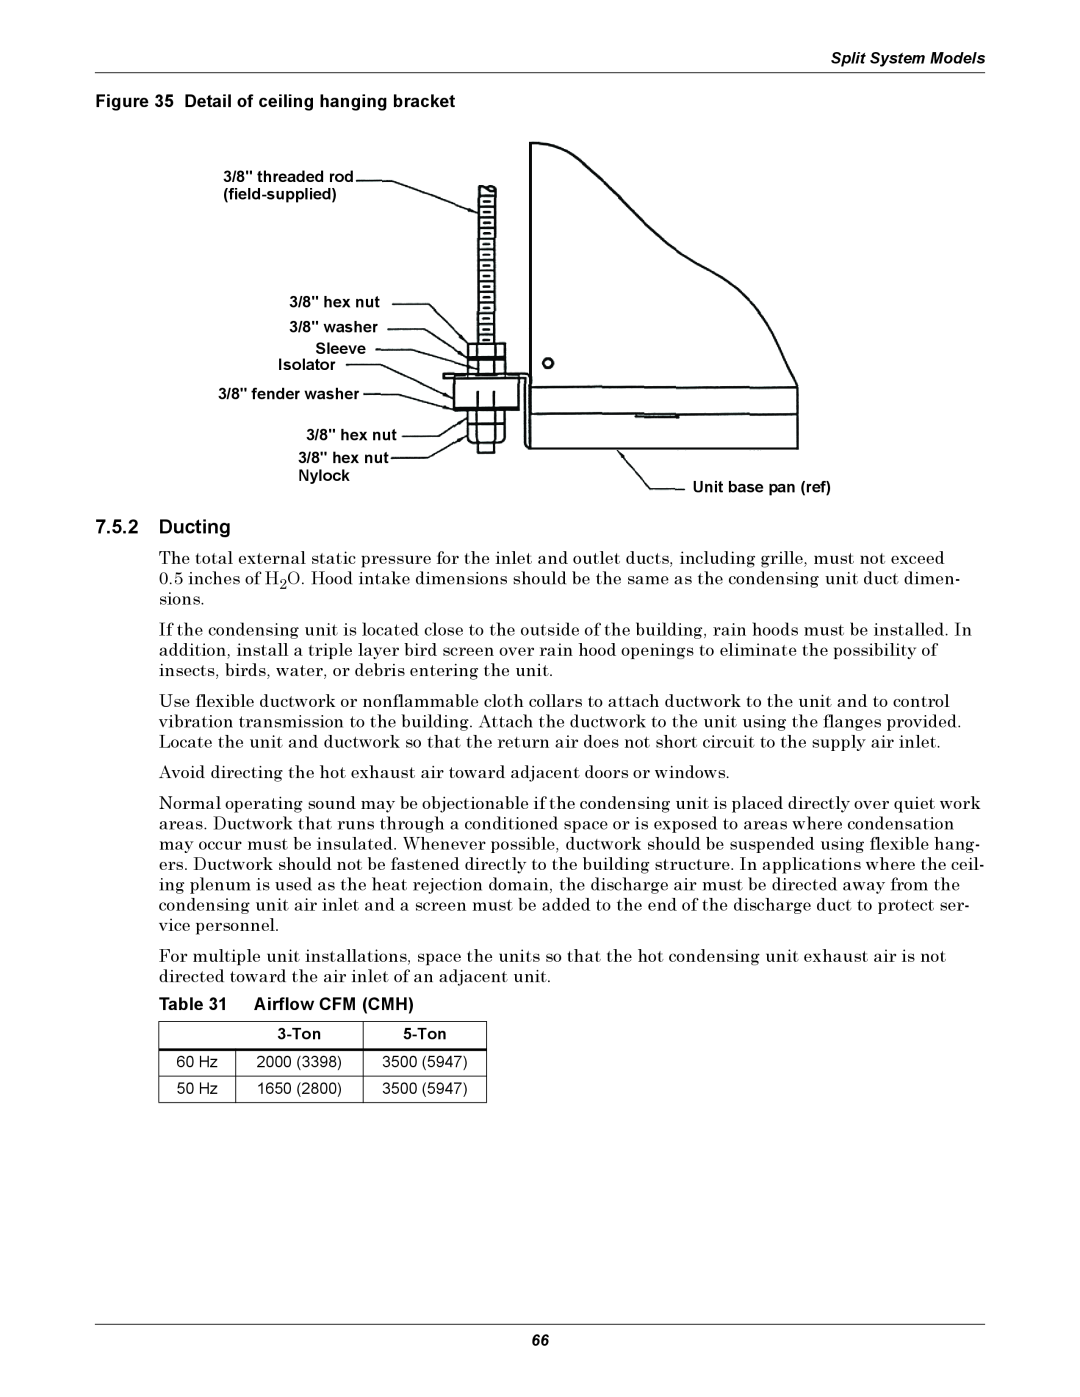 Emerson 3000 installation manual 7.5.2Ducting, Detail of ceiling hanging bracket, Airflow CFM CMH 